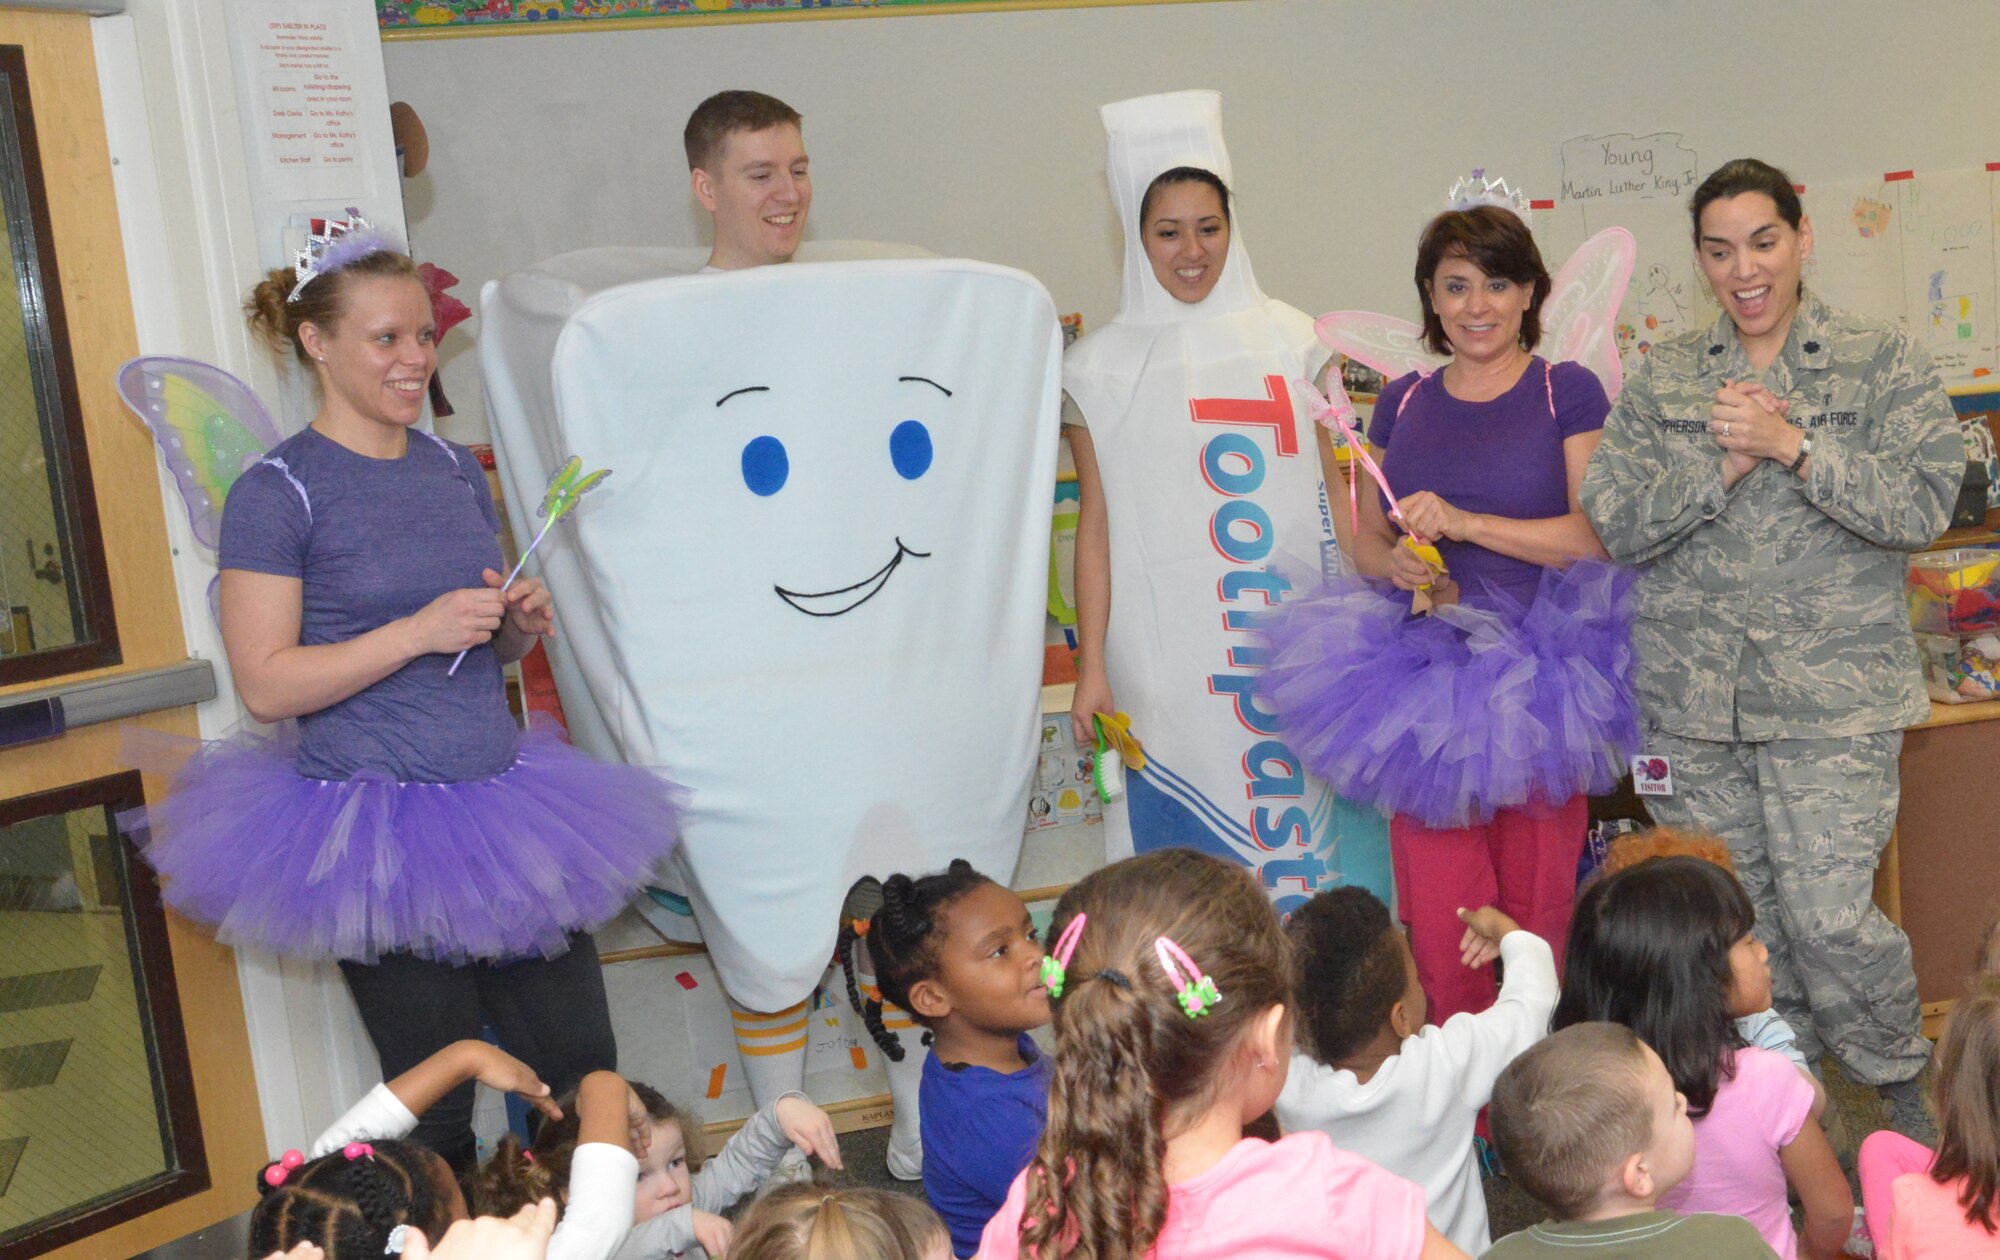 78th Dental Squadron representatives share healthy habits with students at the Child Development Center, February 10, 2015. (U.S. Air Force photo by Ray Crayton)